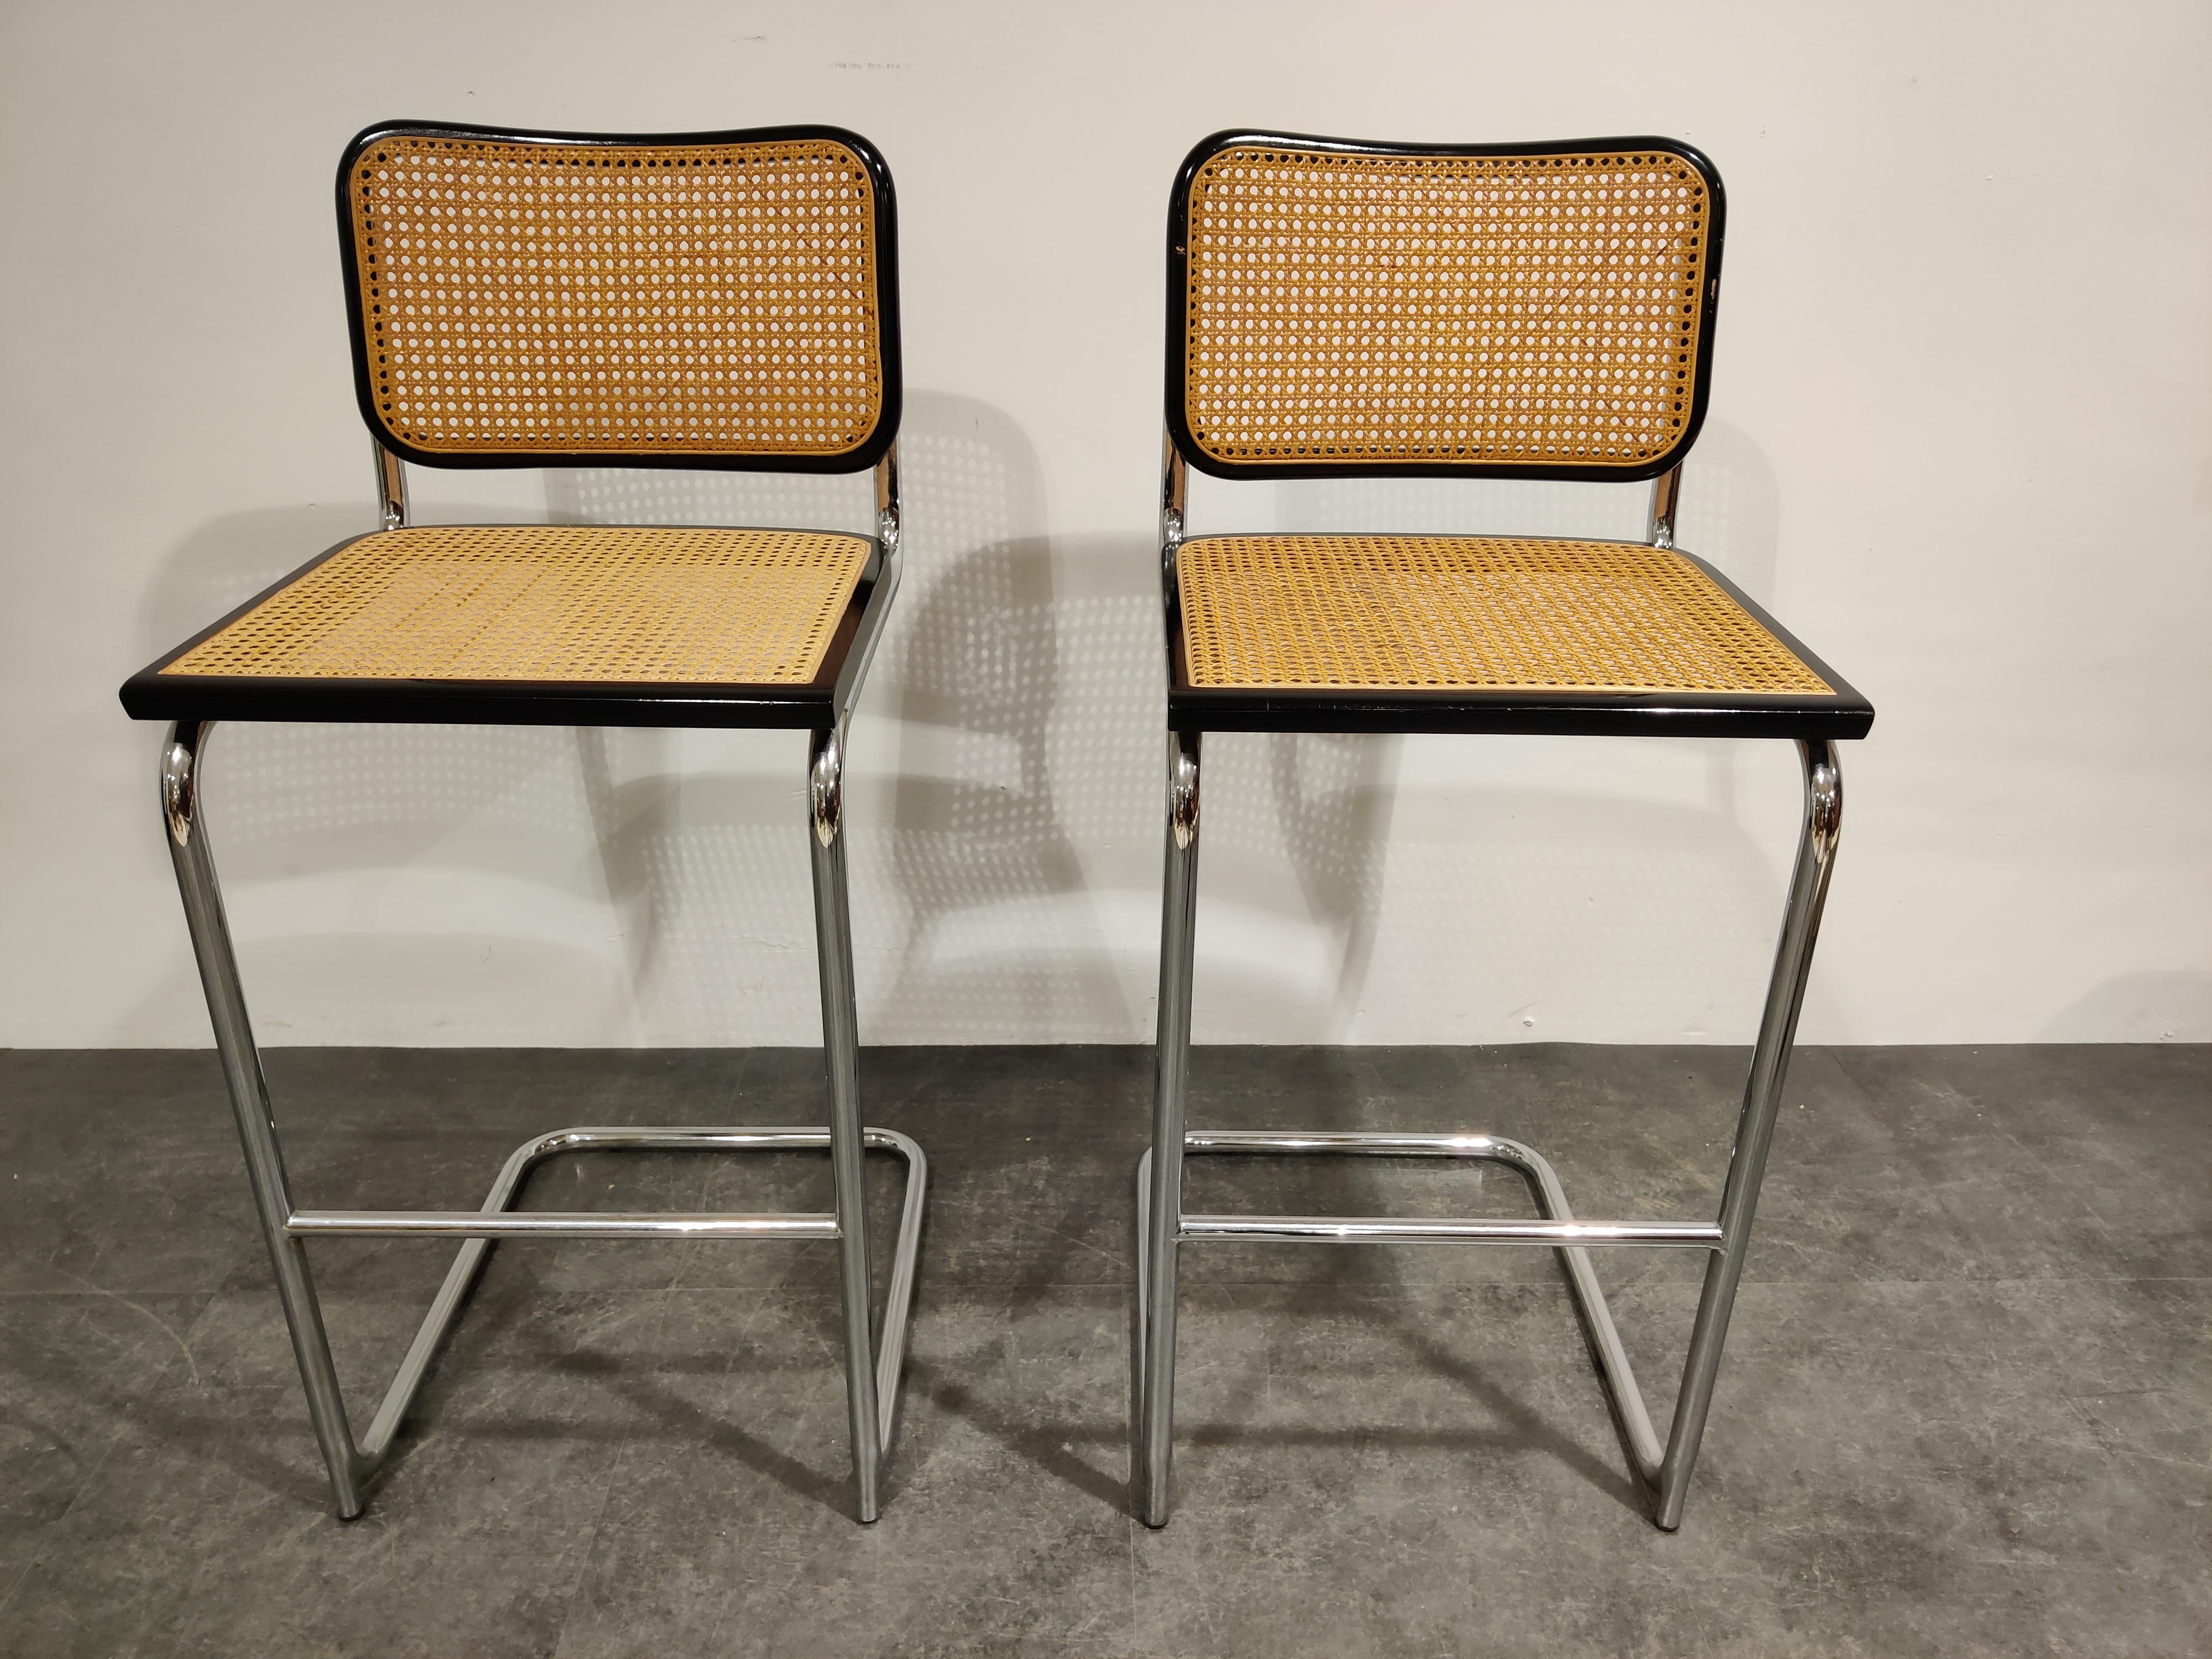 Set of 2 Marcel Breuer Bauhaus design bar stools.

Tubular chrome frame, cane seats and black lacquered wood.

Good condition.

Dimensions:
Height 110cm/43.30